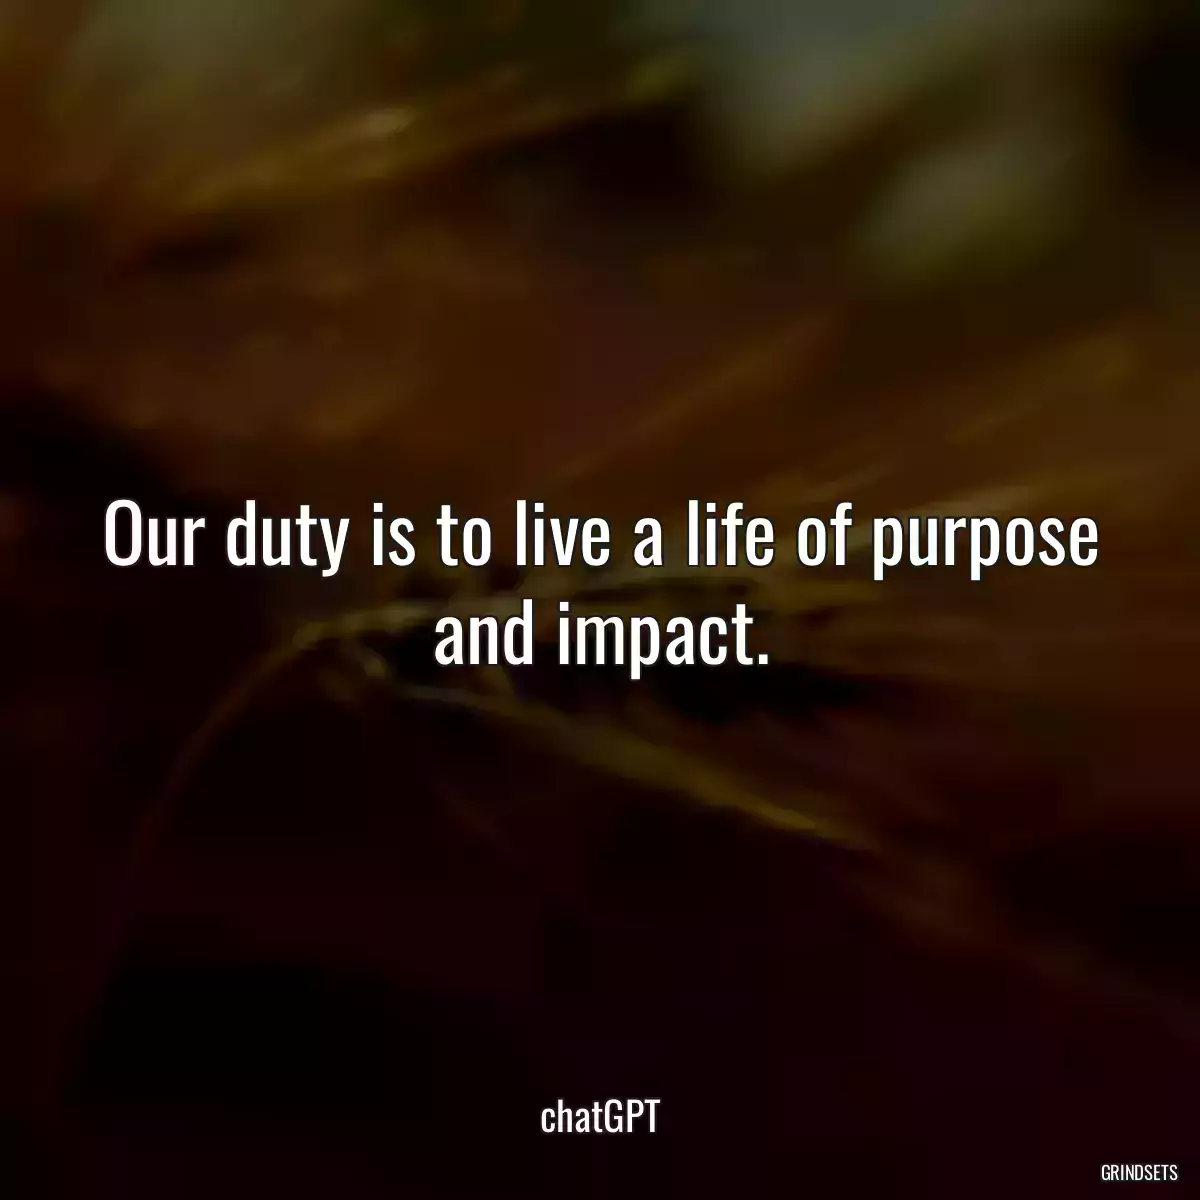 Our duty is to live a life of purpose and impact.